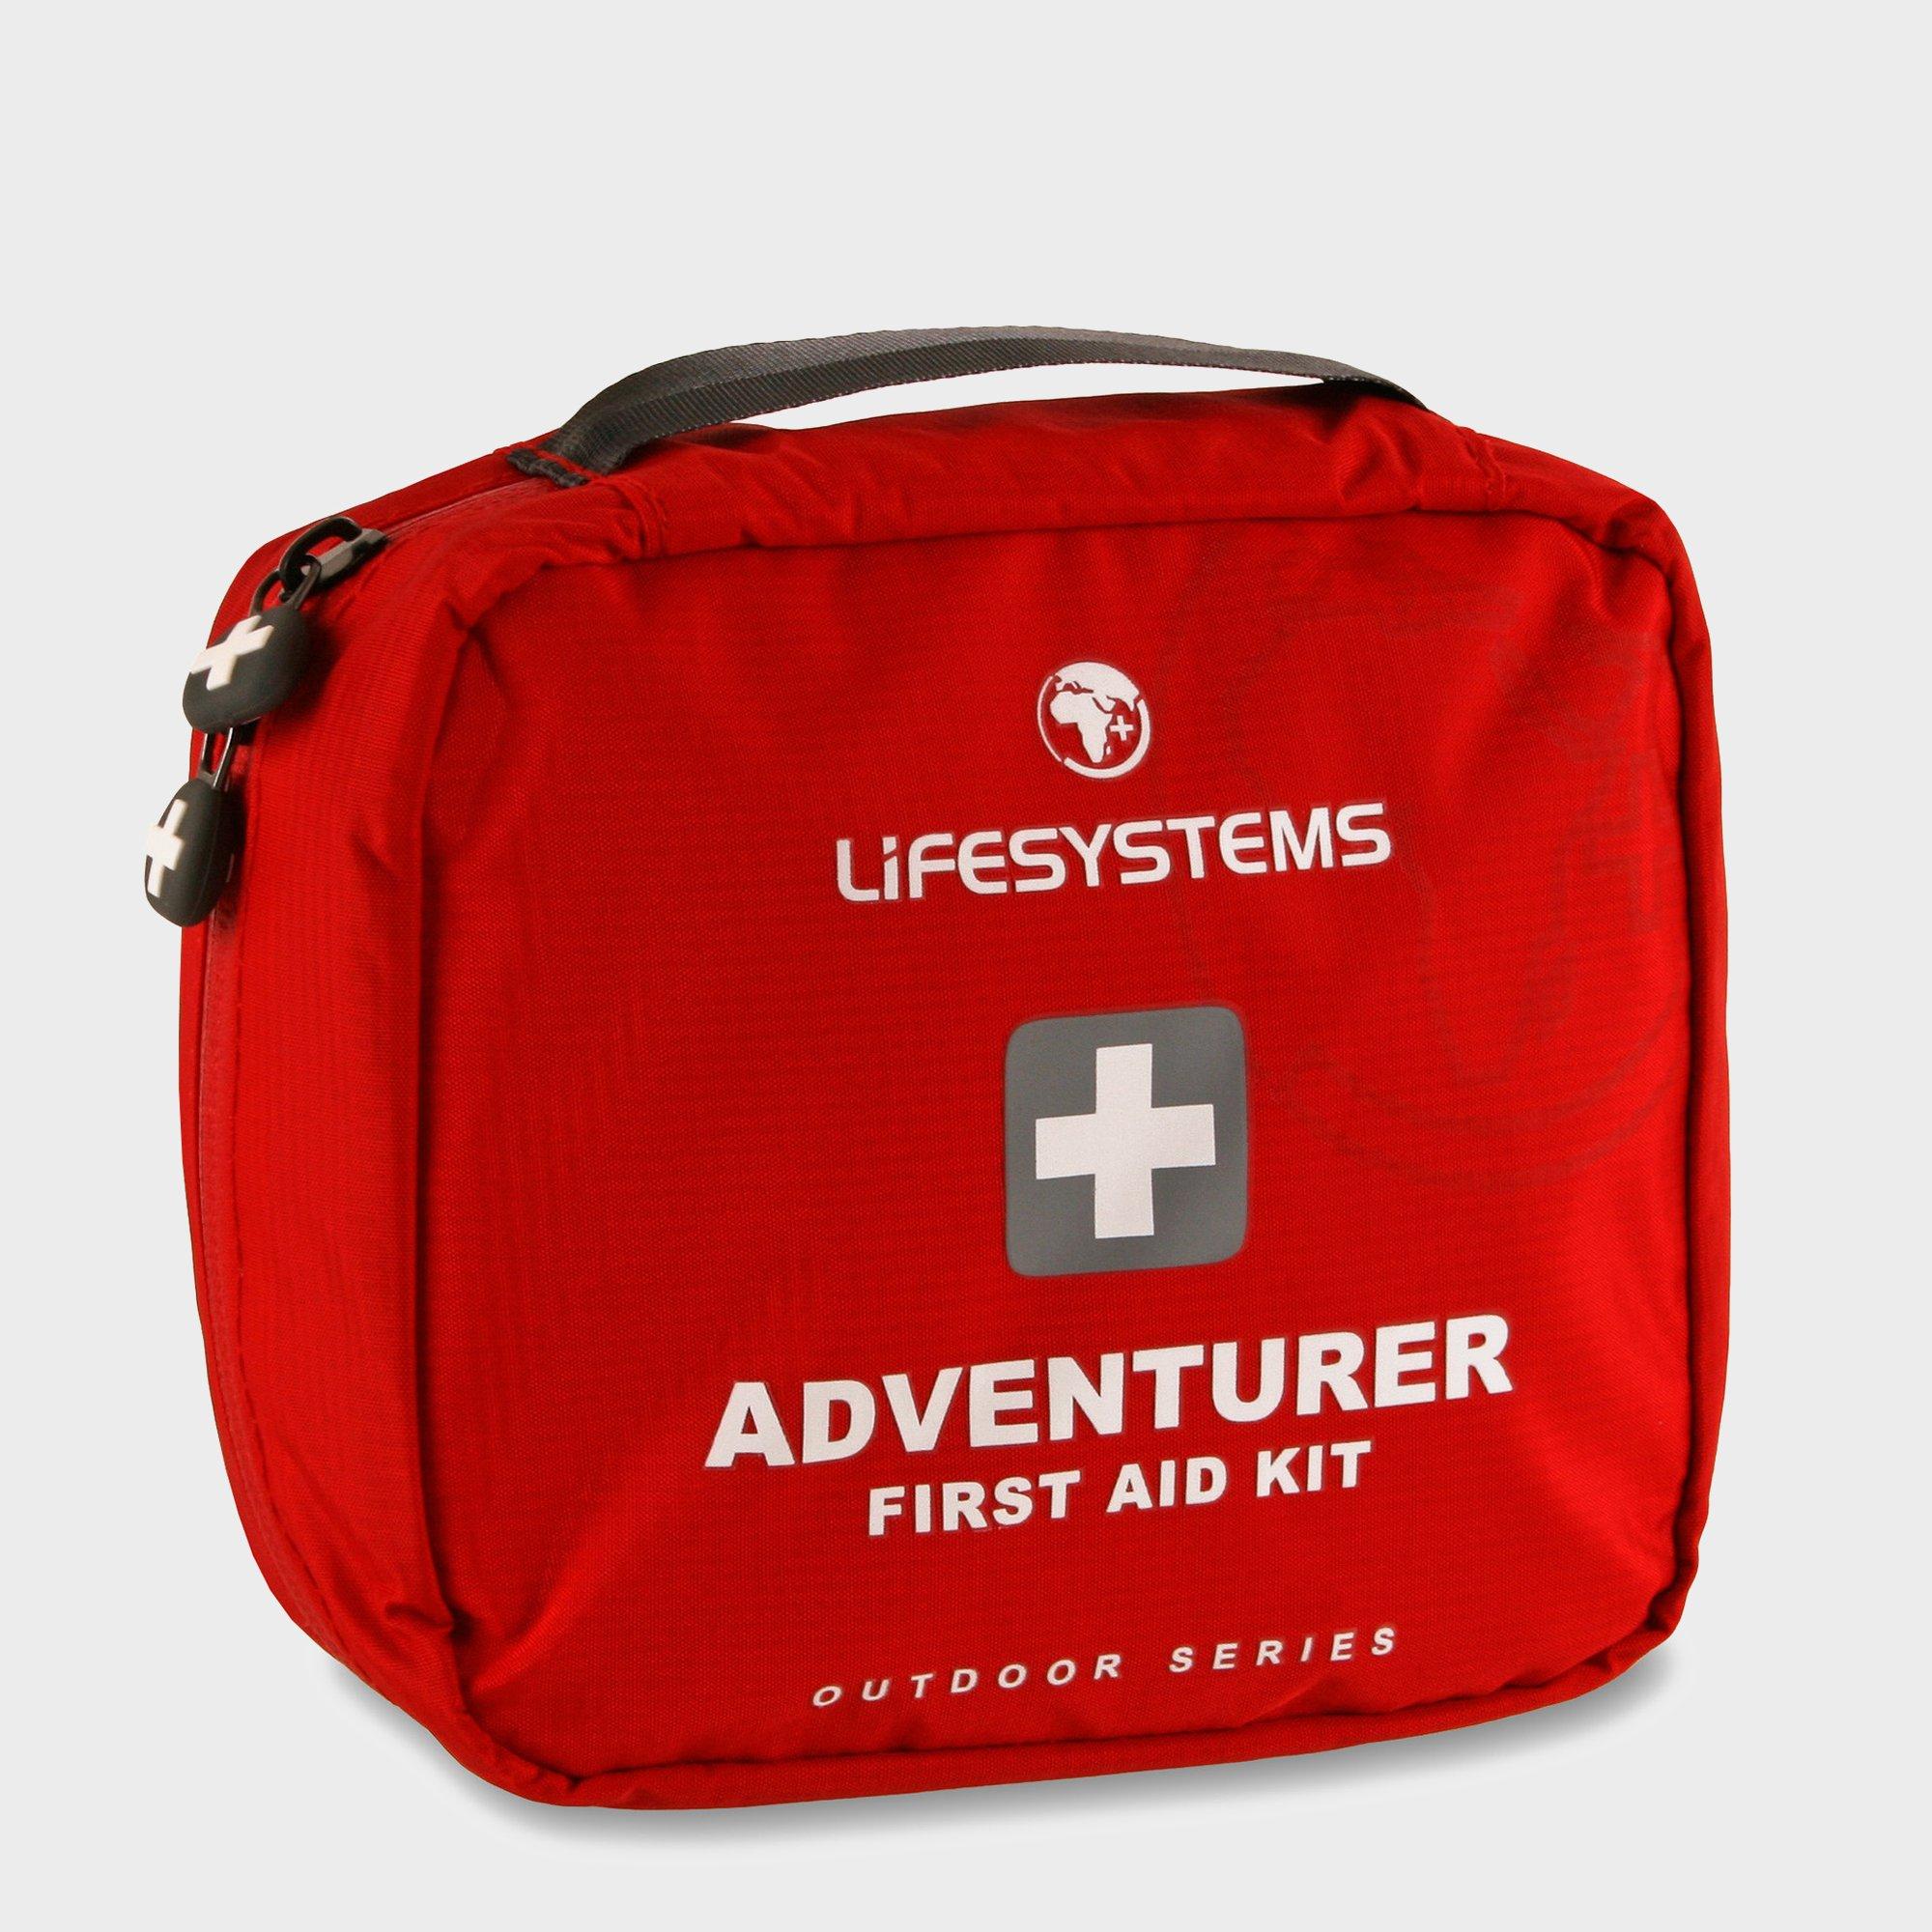 Lifesystems Adventurer First Aid Kit - Red  Red